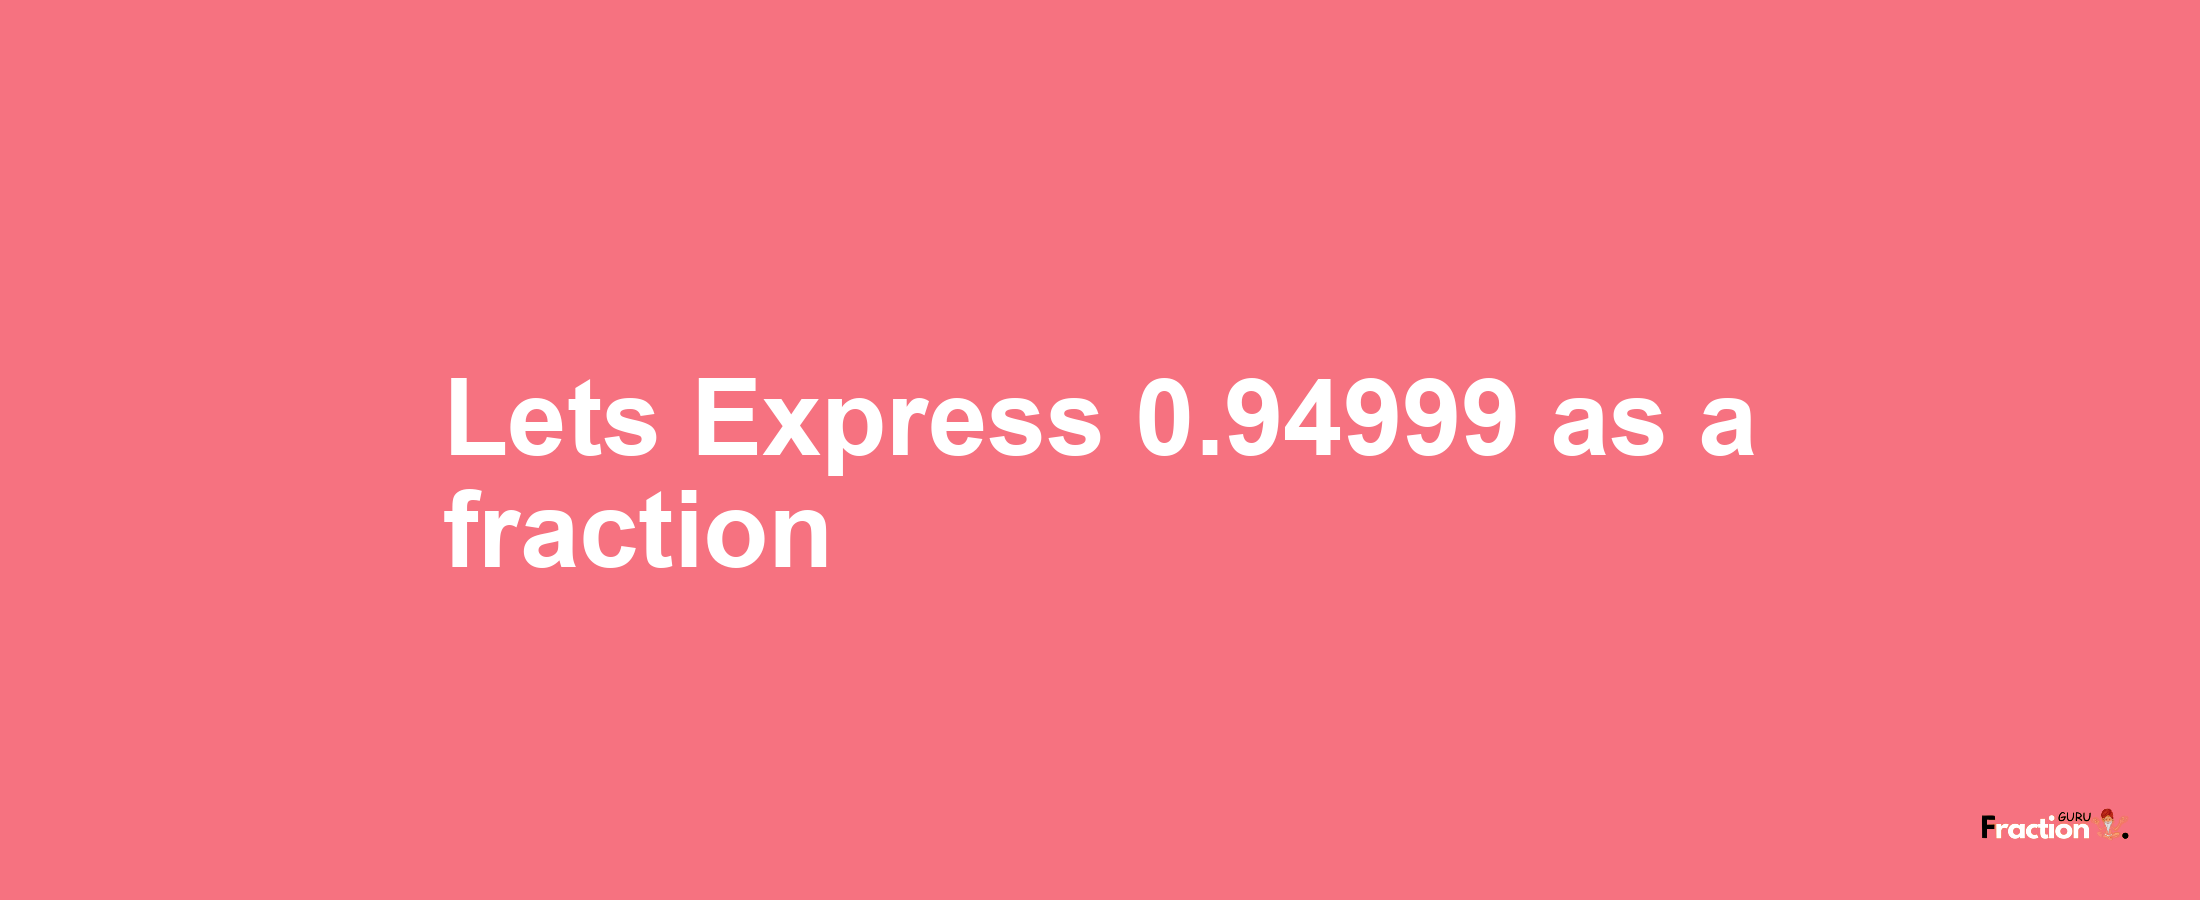 Lets Express 0.94999 as afraction